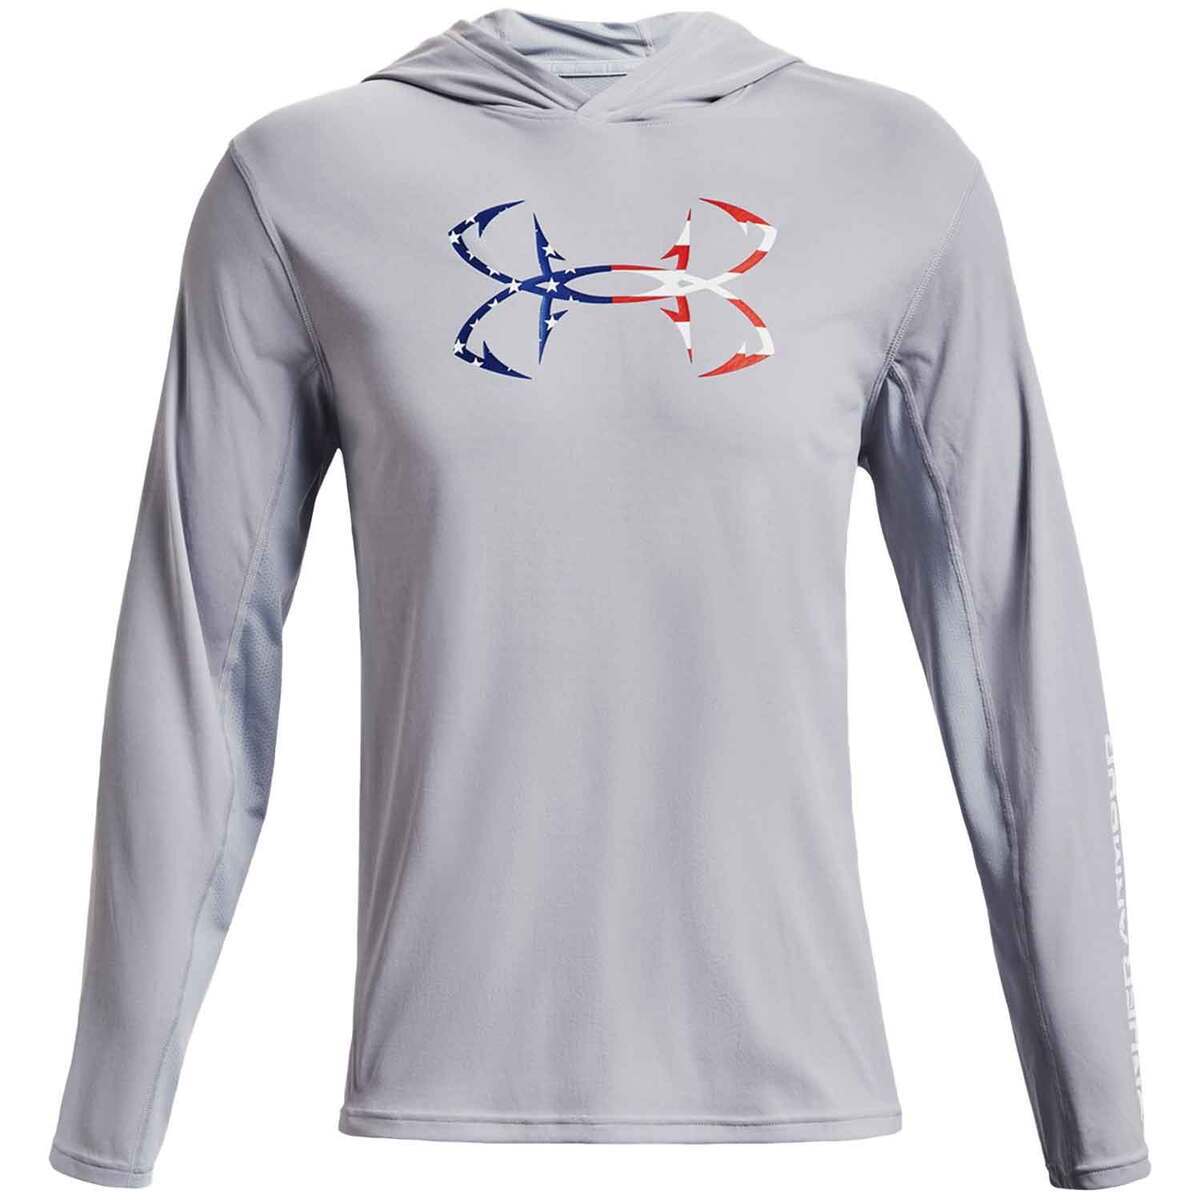 Under Armour Fishing Hoodies & Jackets - Tackle Warehouse